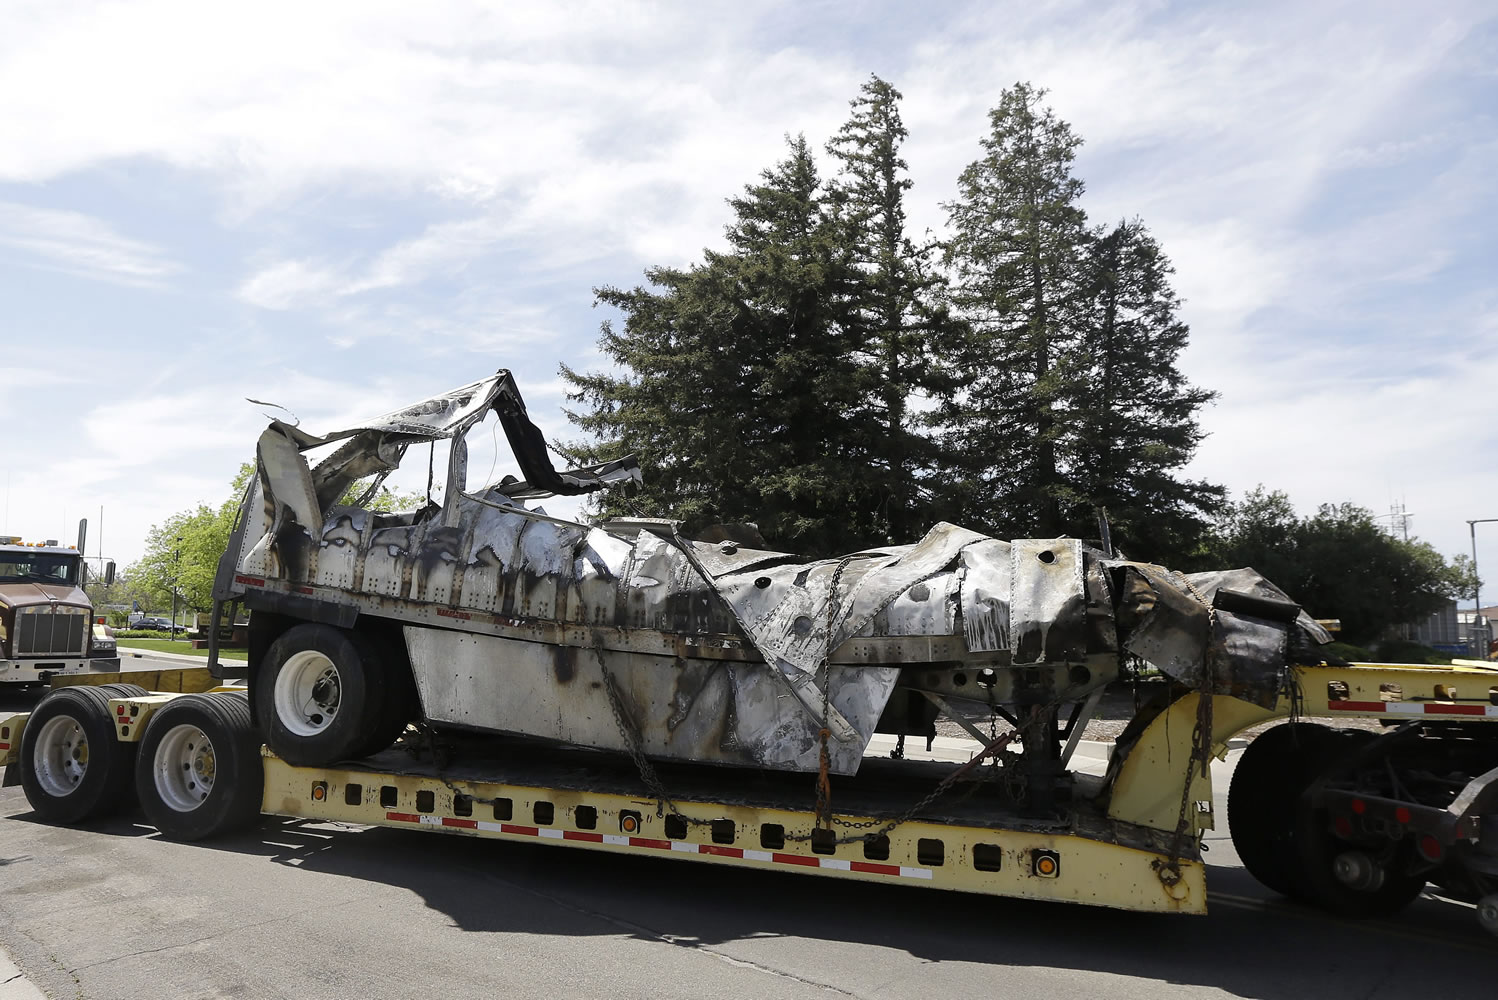 The demolished remains of a FedEx truck is towed into a CalTrans maintenance station in Willows, Calif., on Friday.